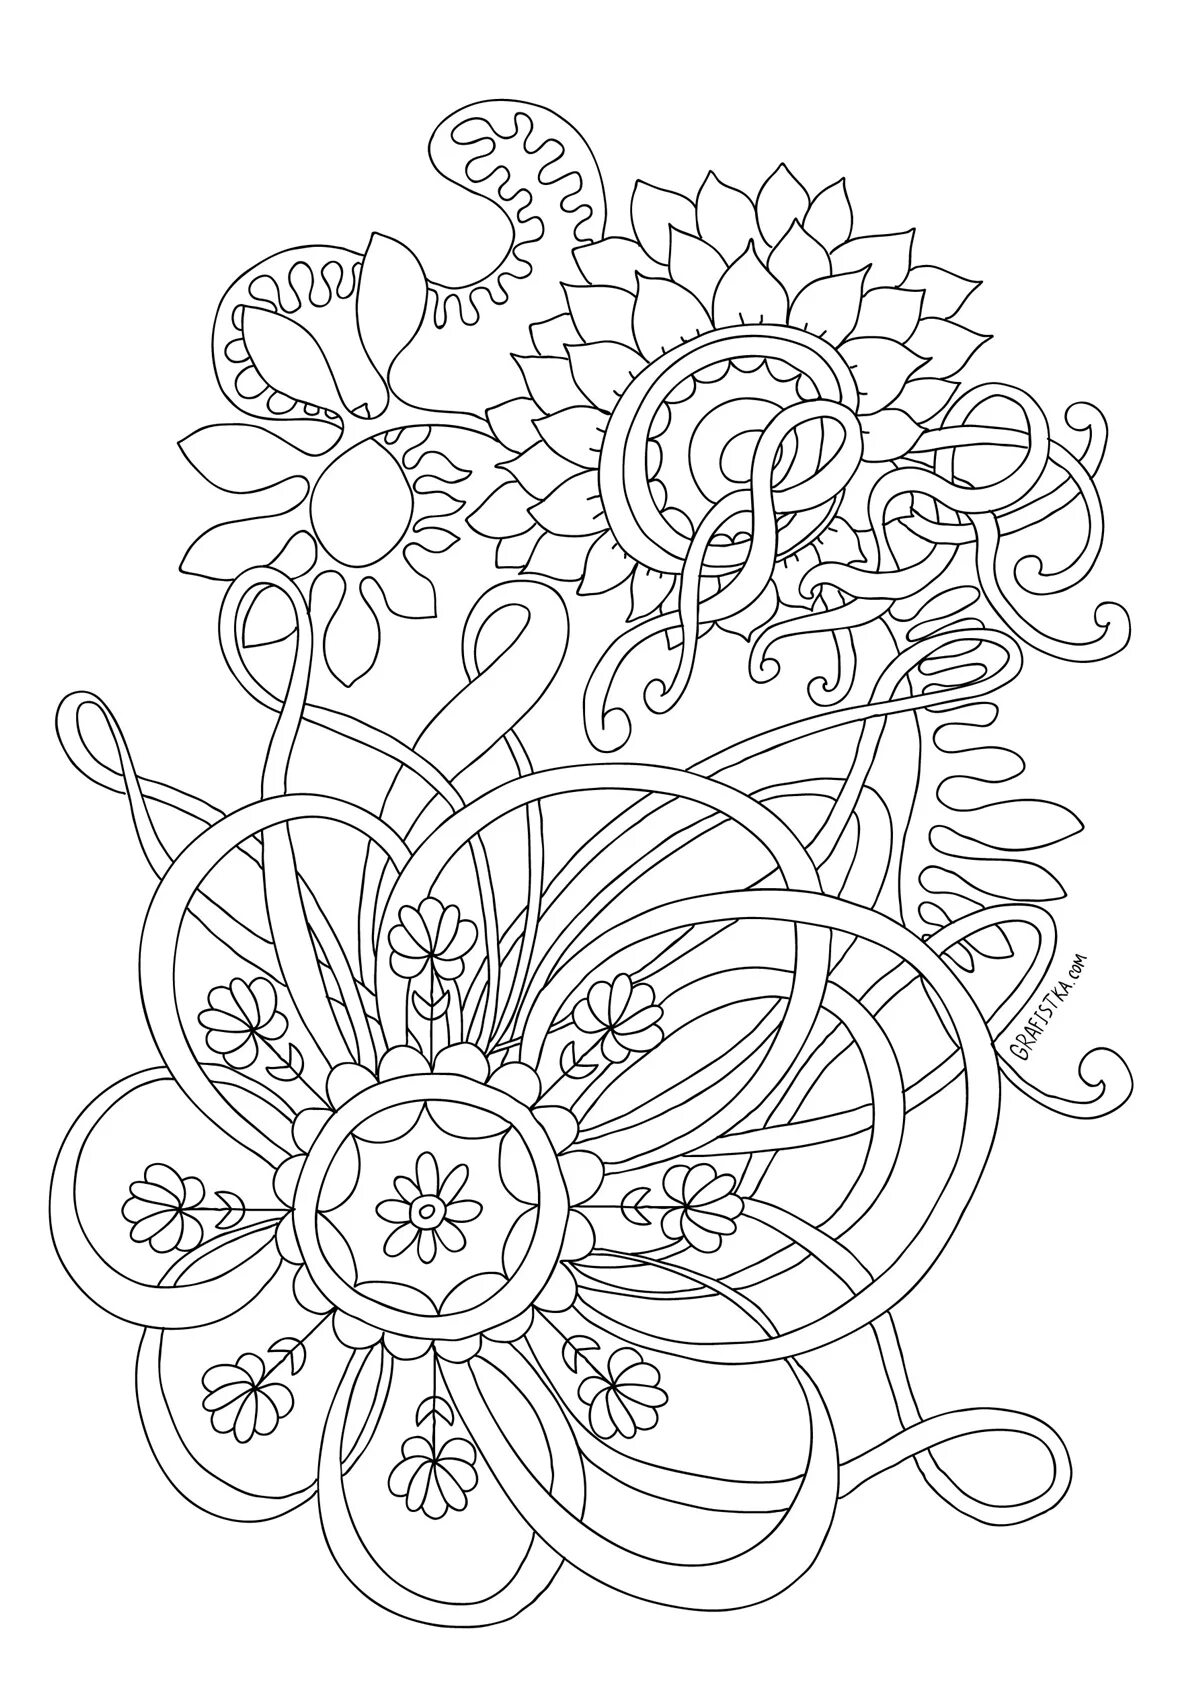 Exciting coloring and ornaments for kids